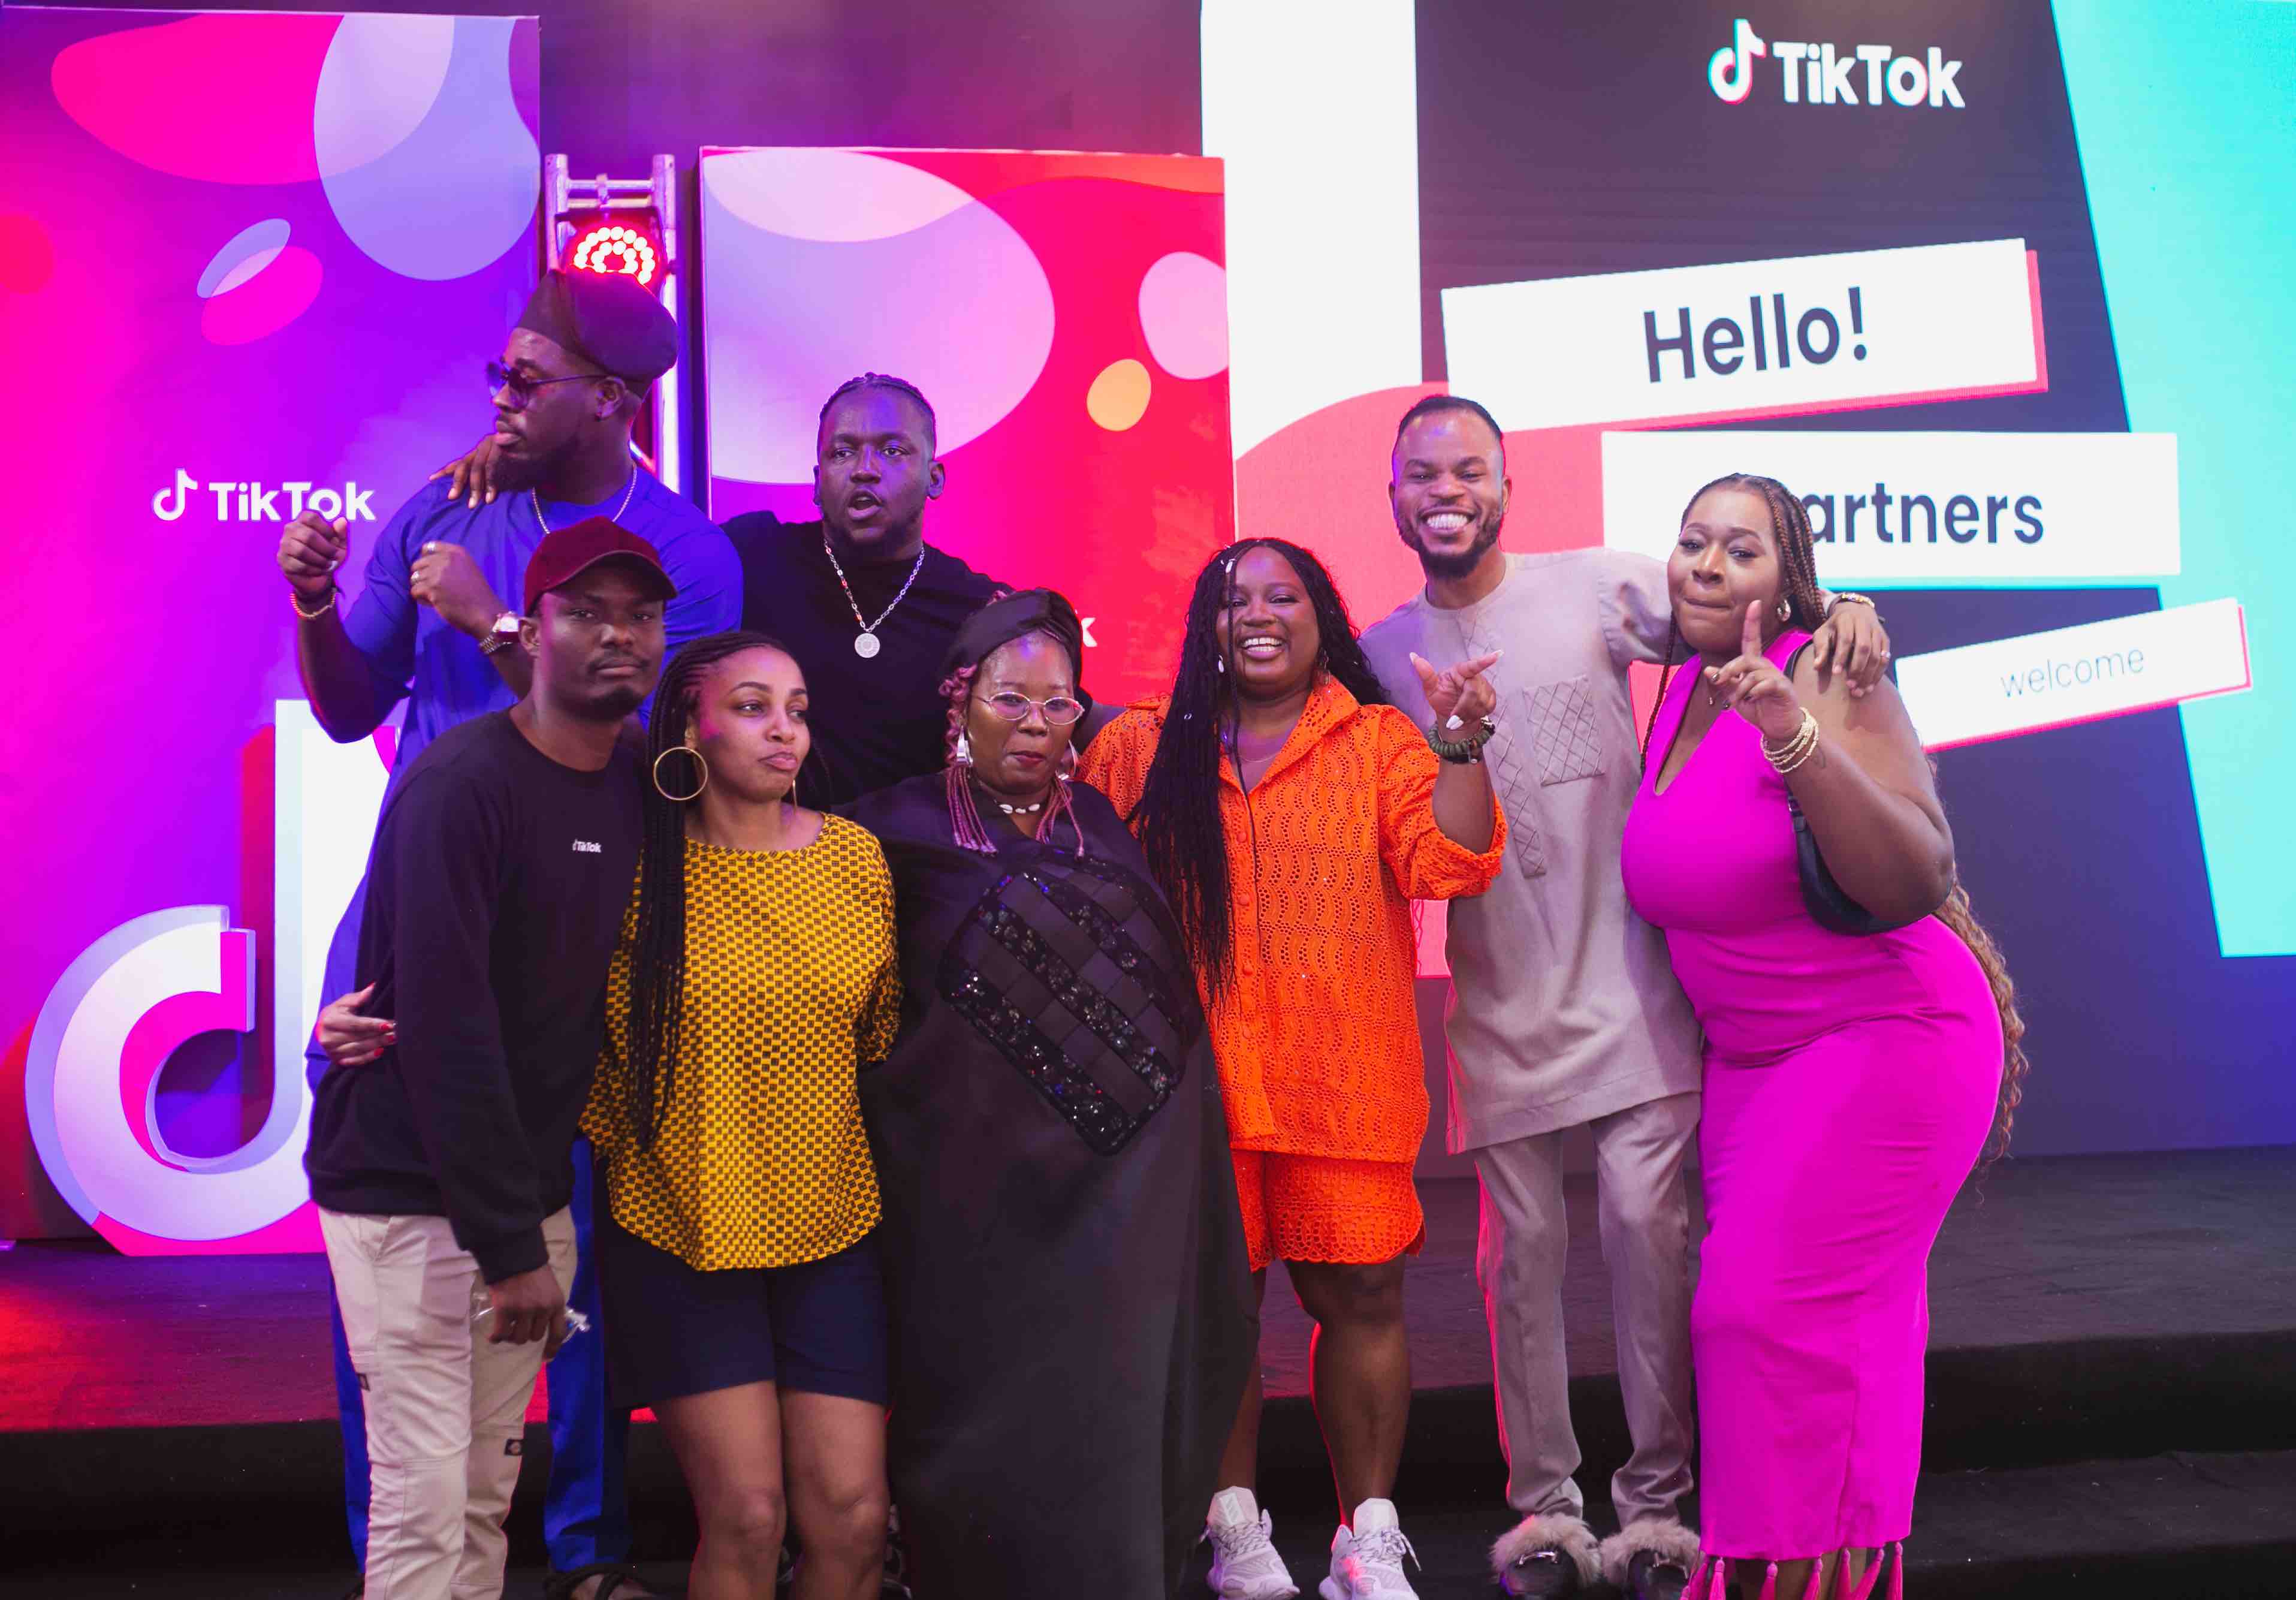 #NollywoodNovember: Here is all that happened at TikTok’s Nollywood summit